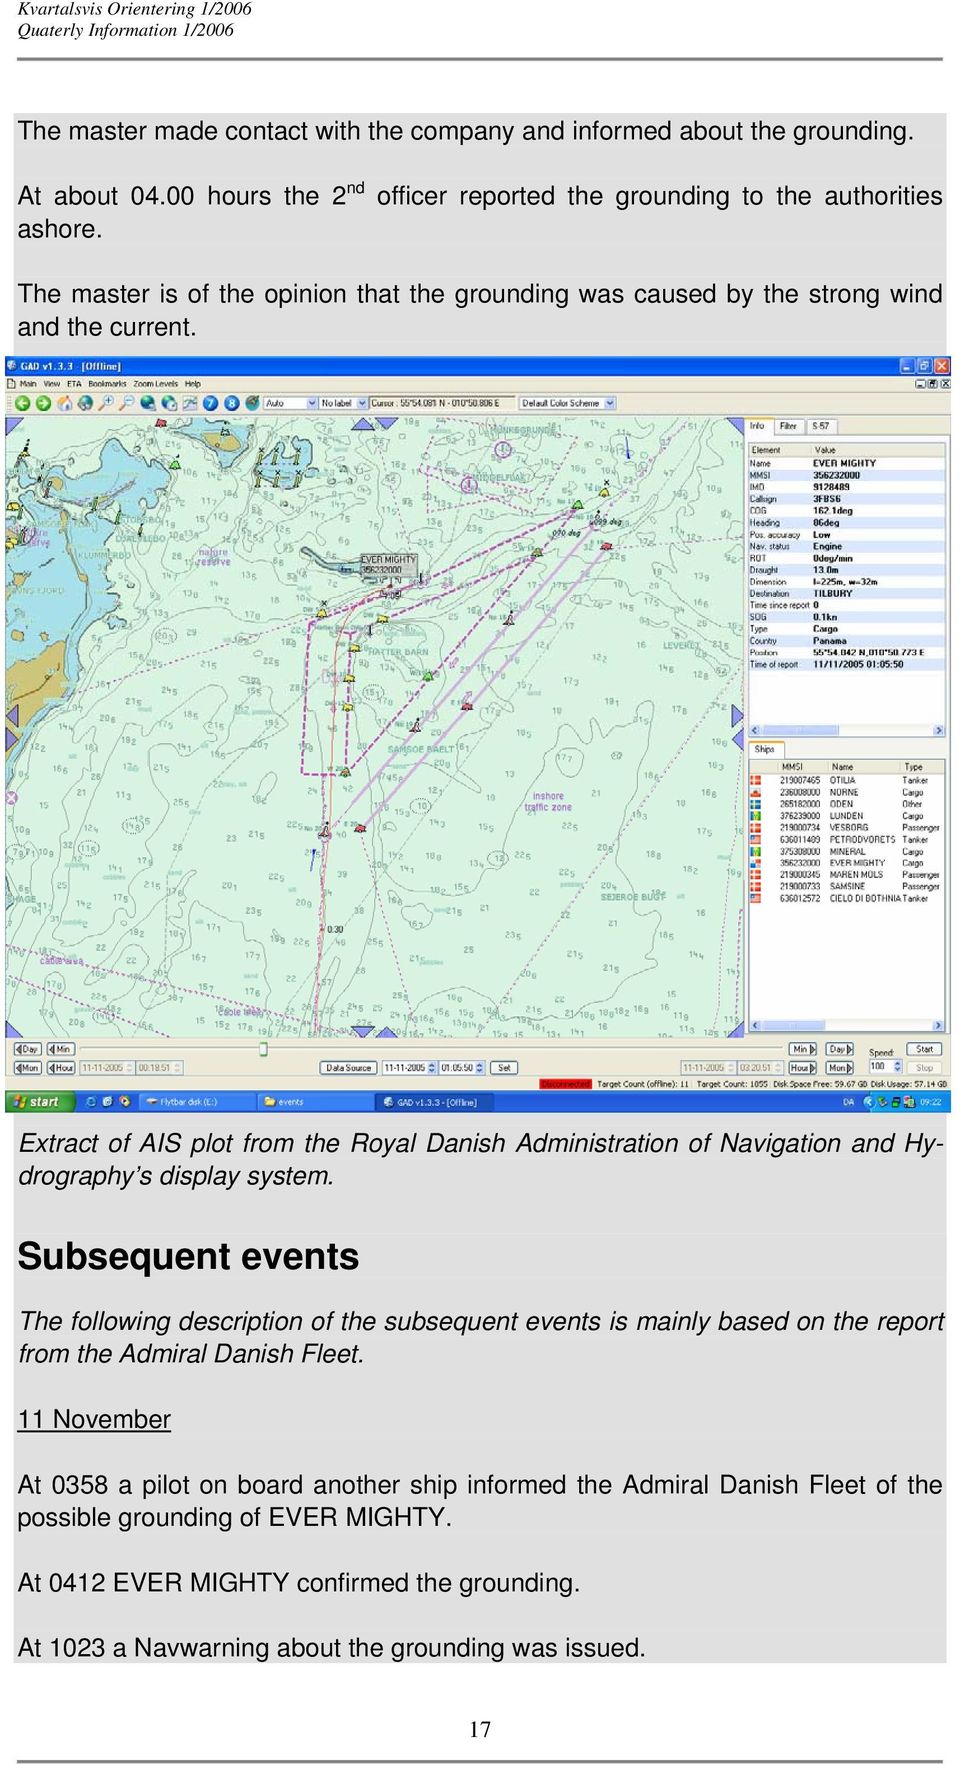 Extract of AIS plot from the Royal Danish Administration of Navigation and Hydrography s display system.